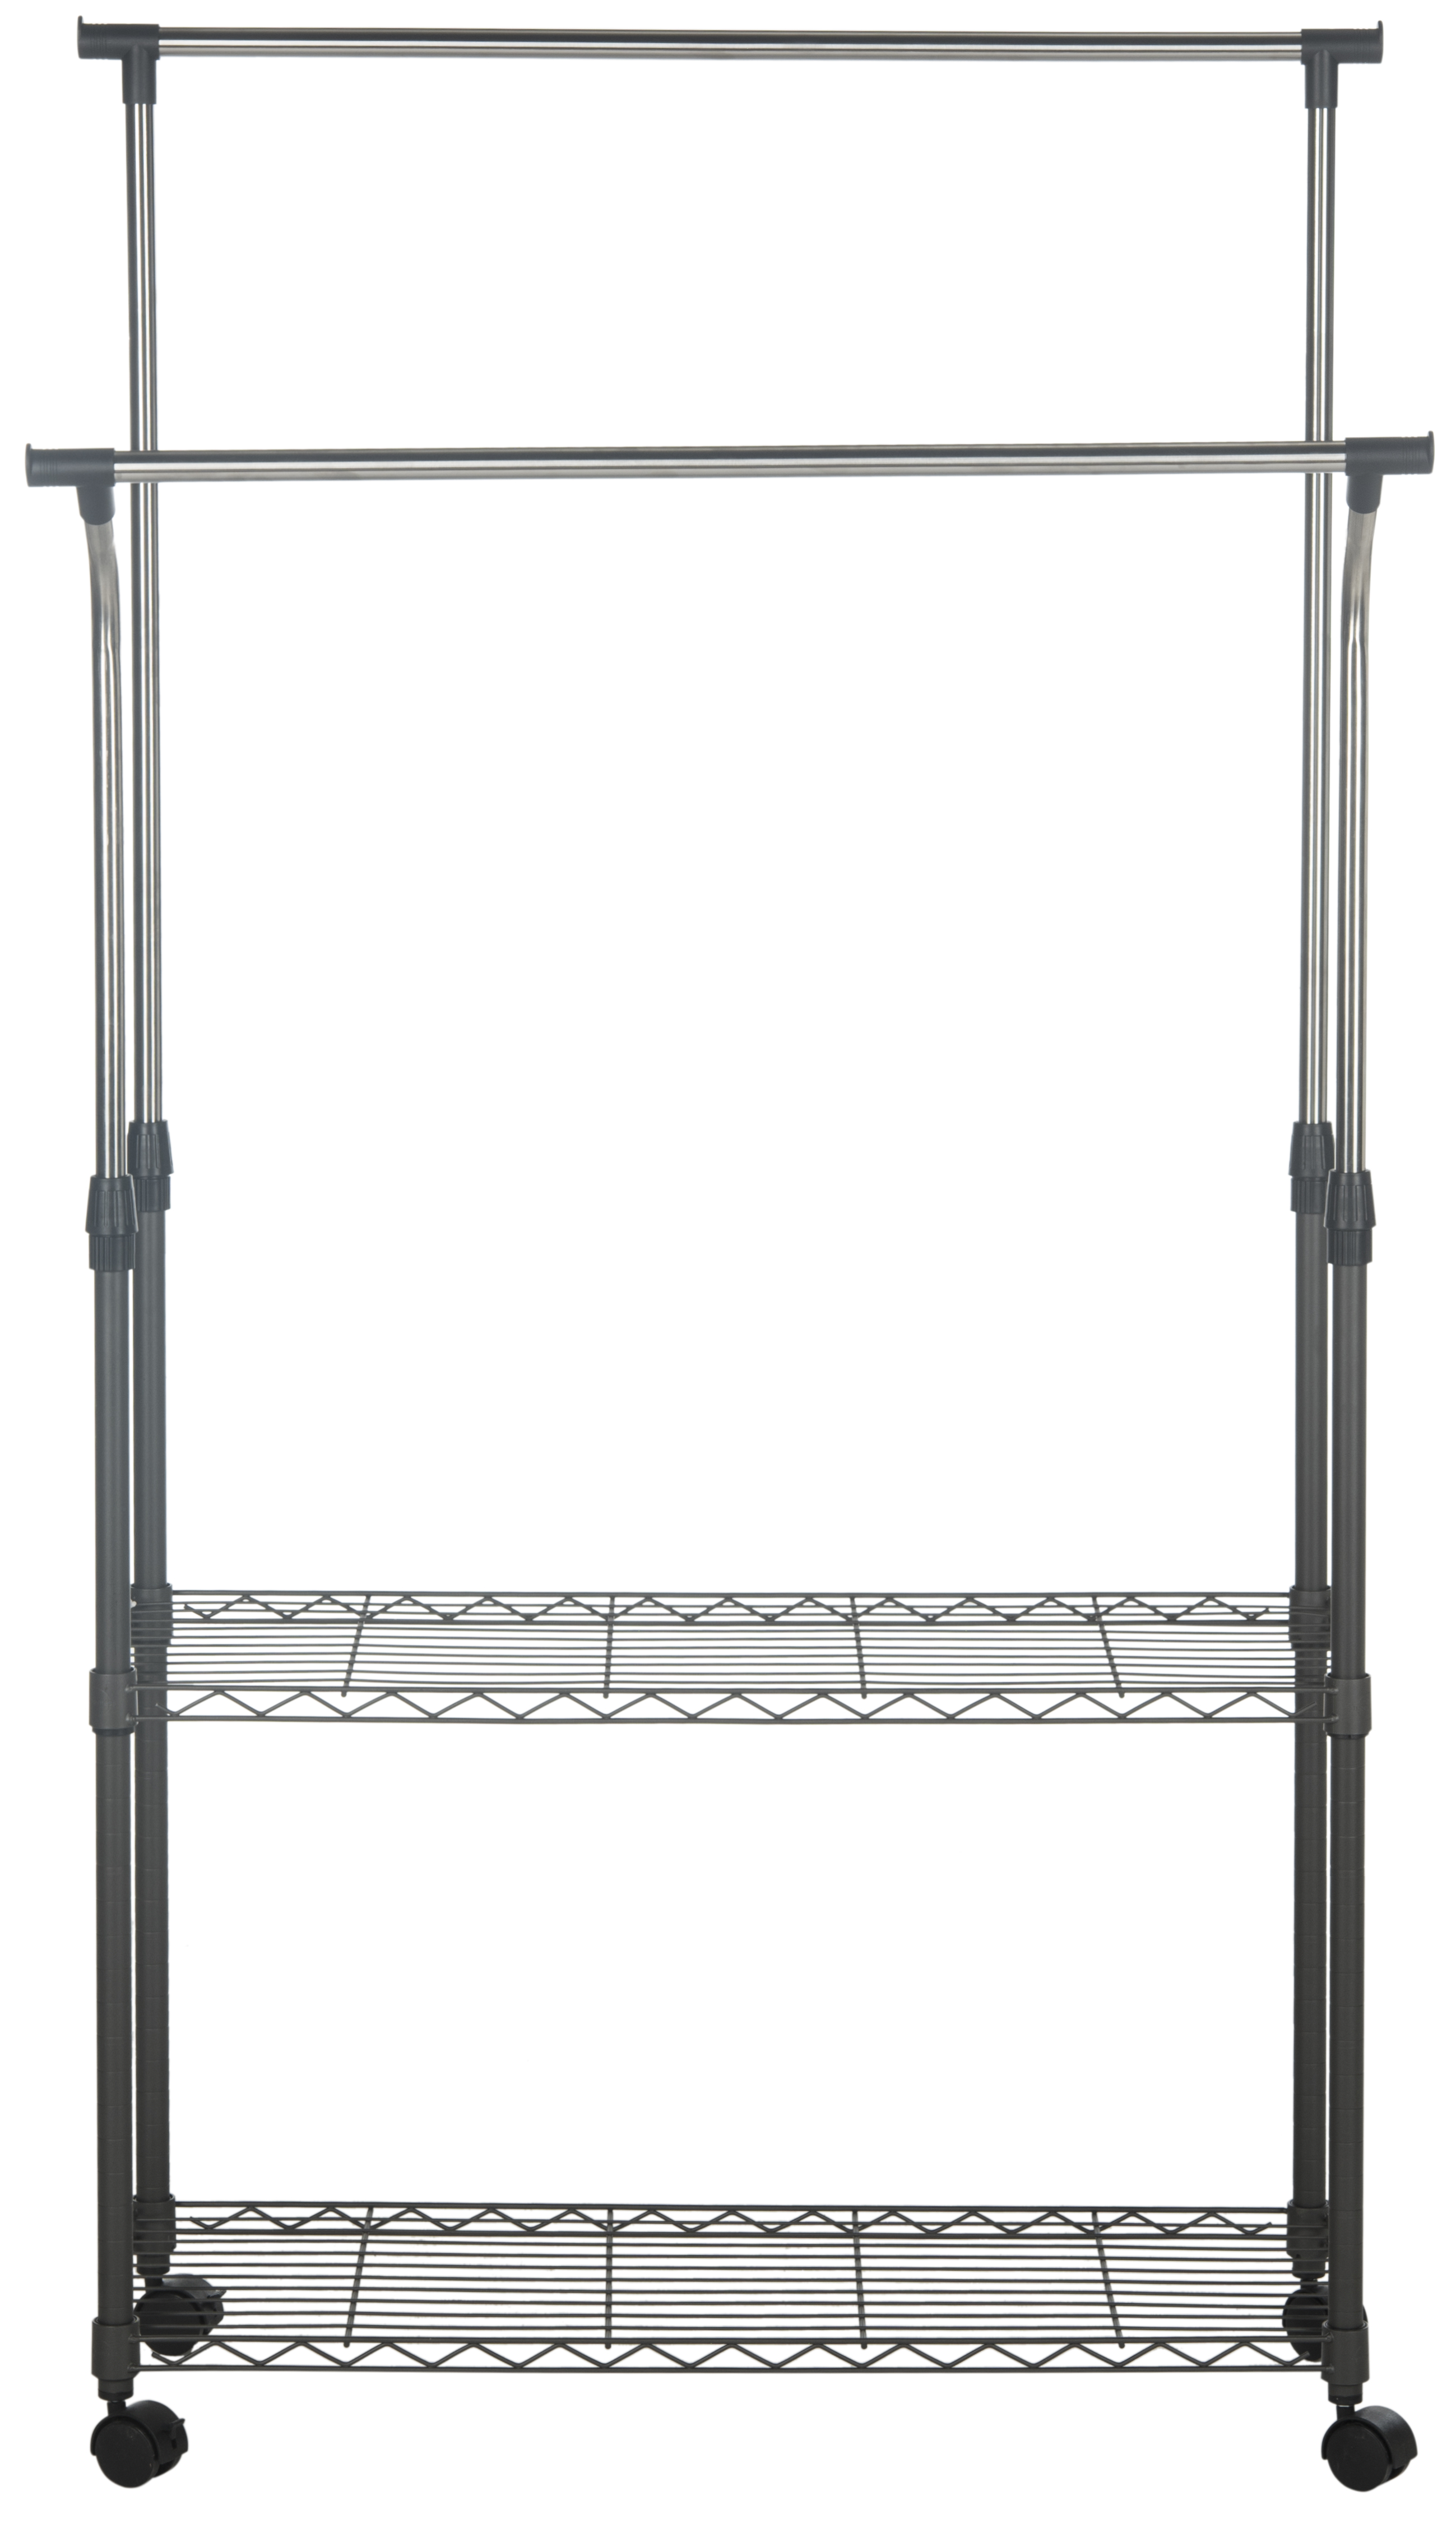 Safavieh Giorgio Chrome Wire Double Rod Clothes Rack with Casters - image 4 of 6